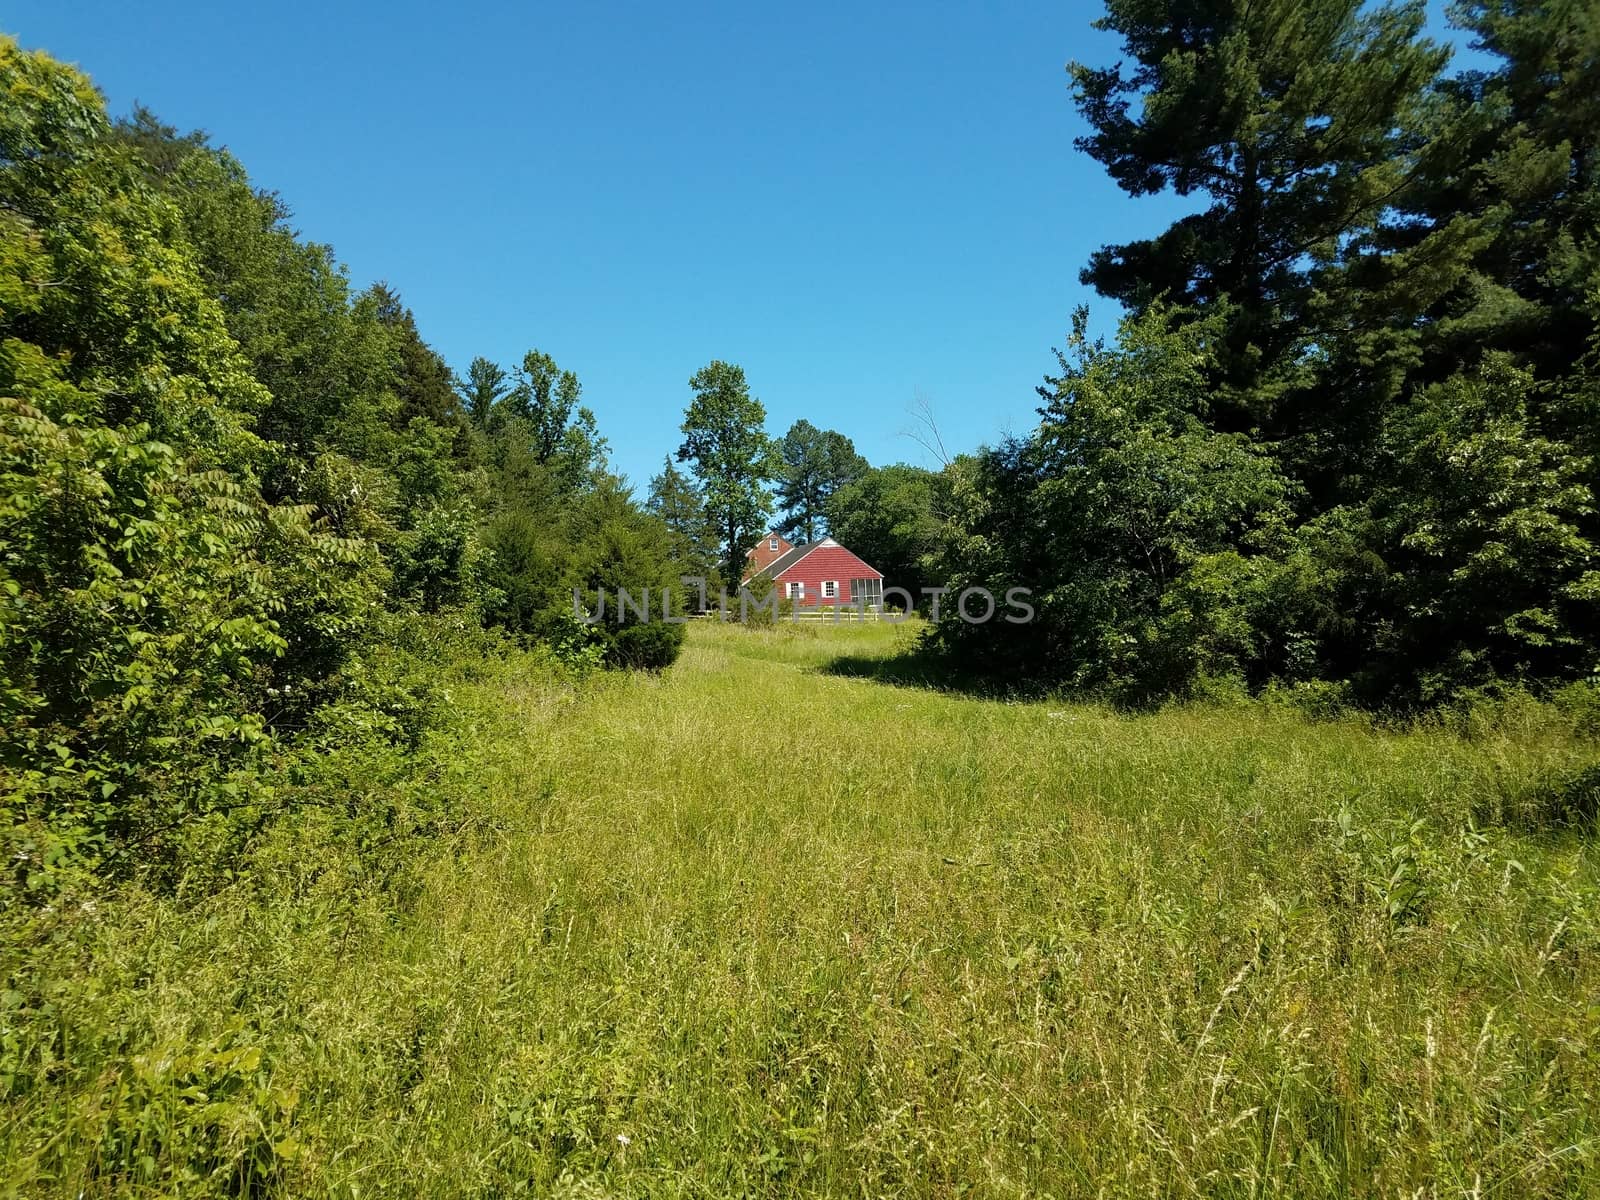 red house and green grass field and trees by stockphotofan1